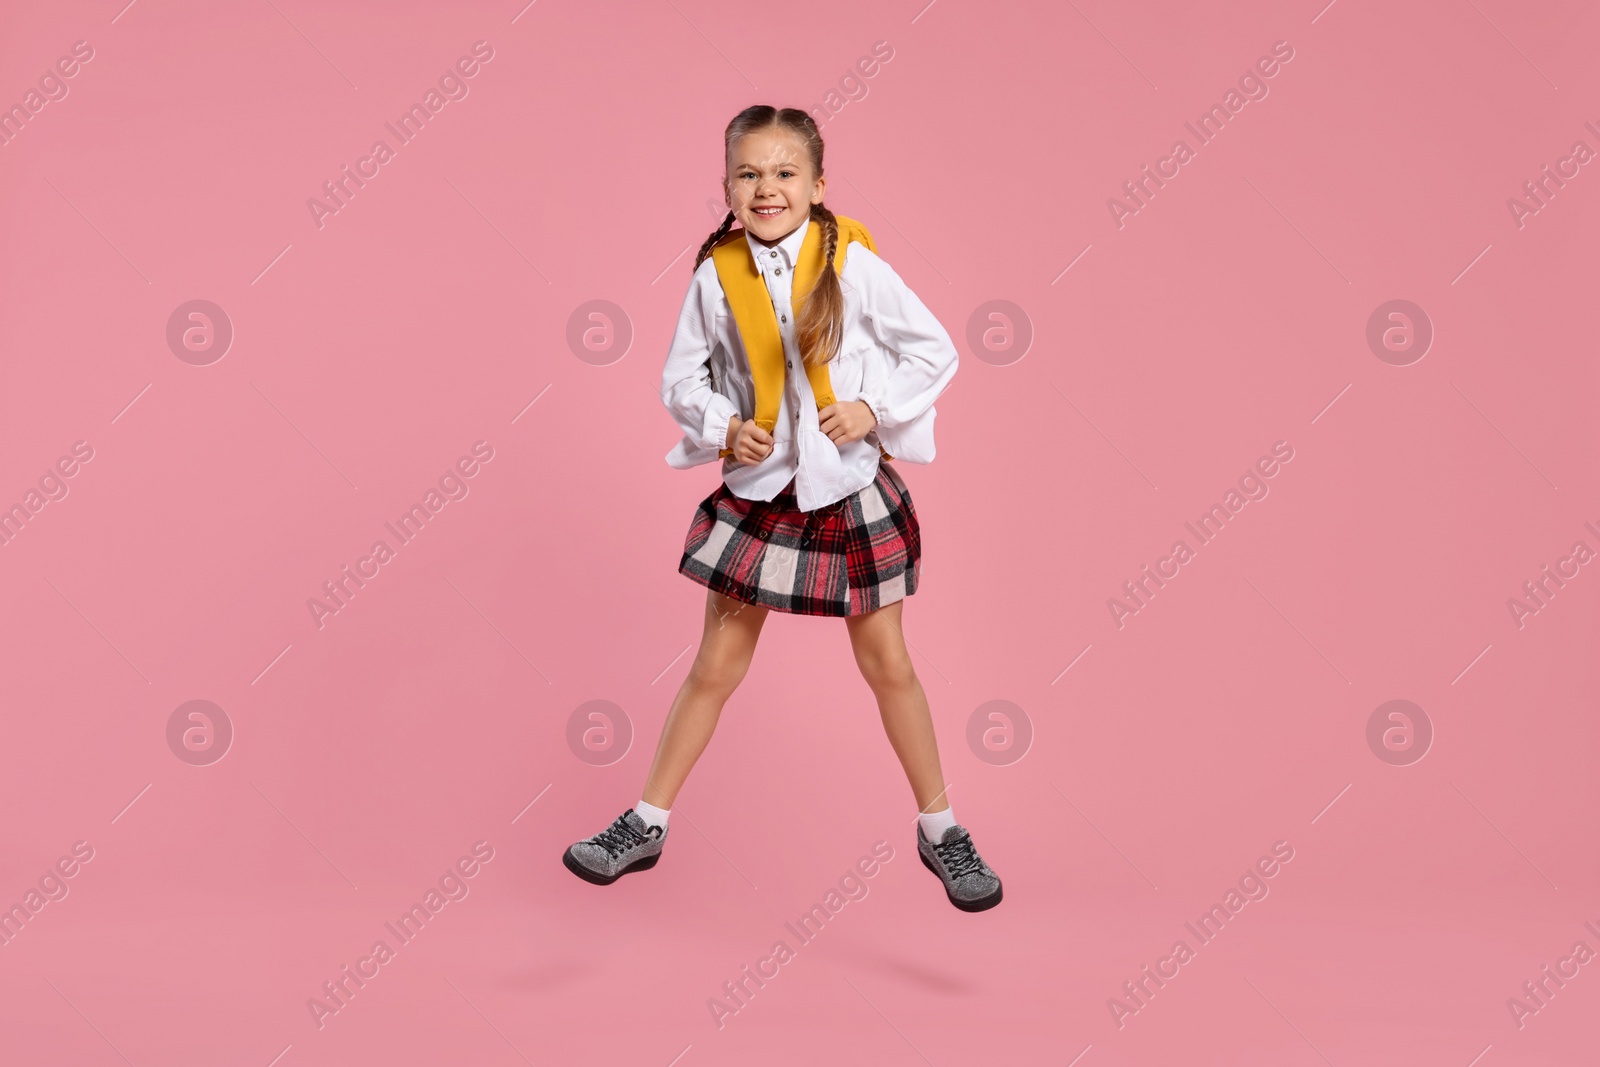 Photo of Happy schoolgirl with backpack jumping on pink background